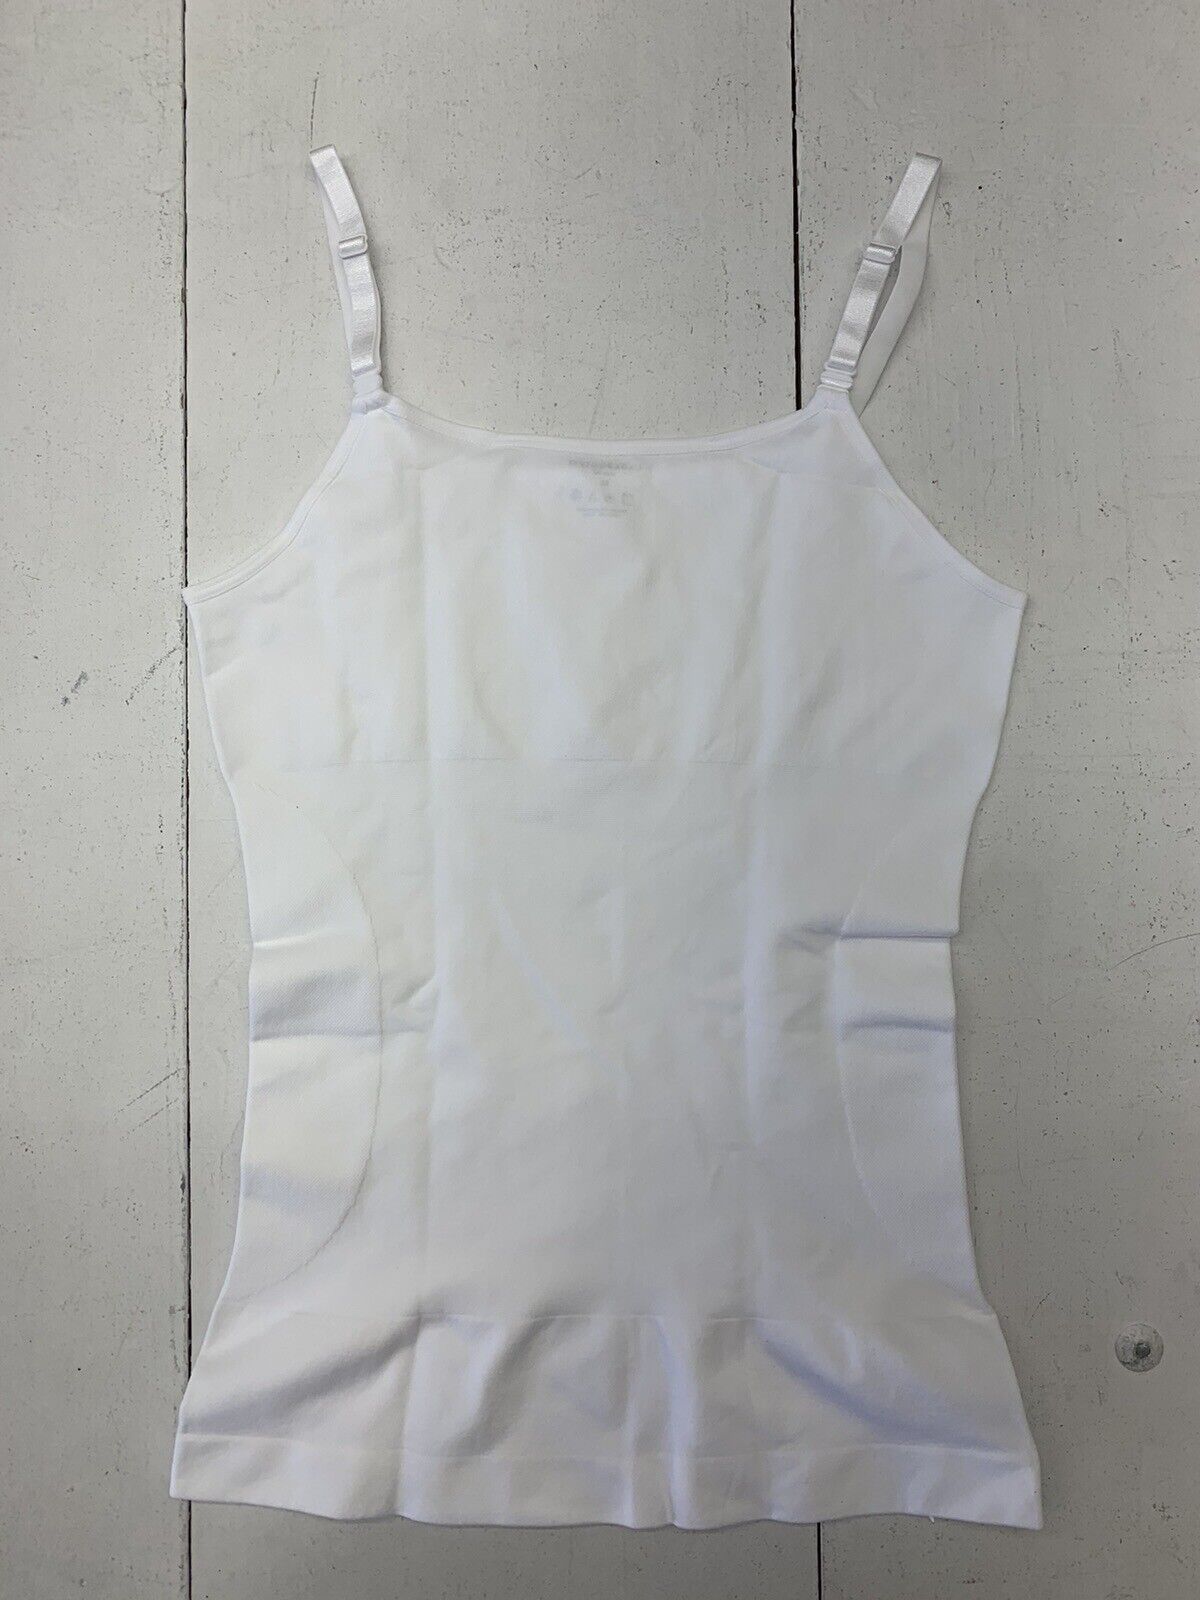 Under Outfit Womens White Tank Size XL - beyond exchange